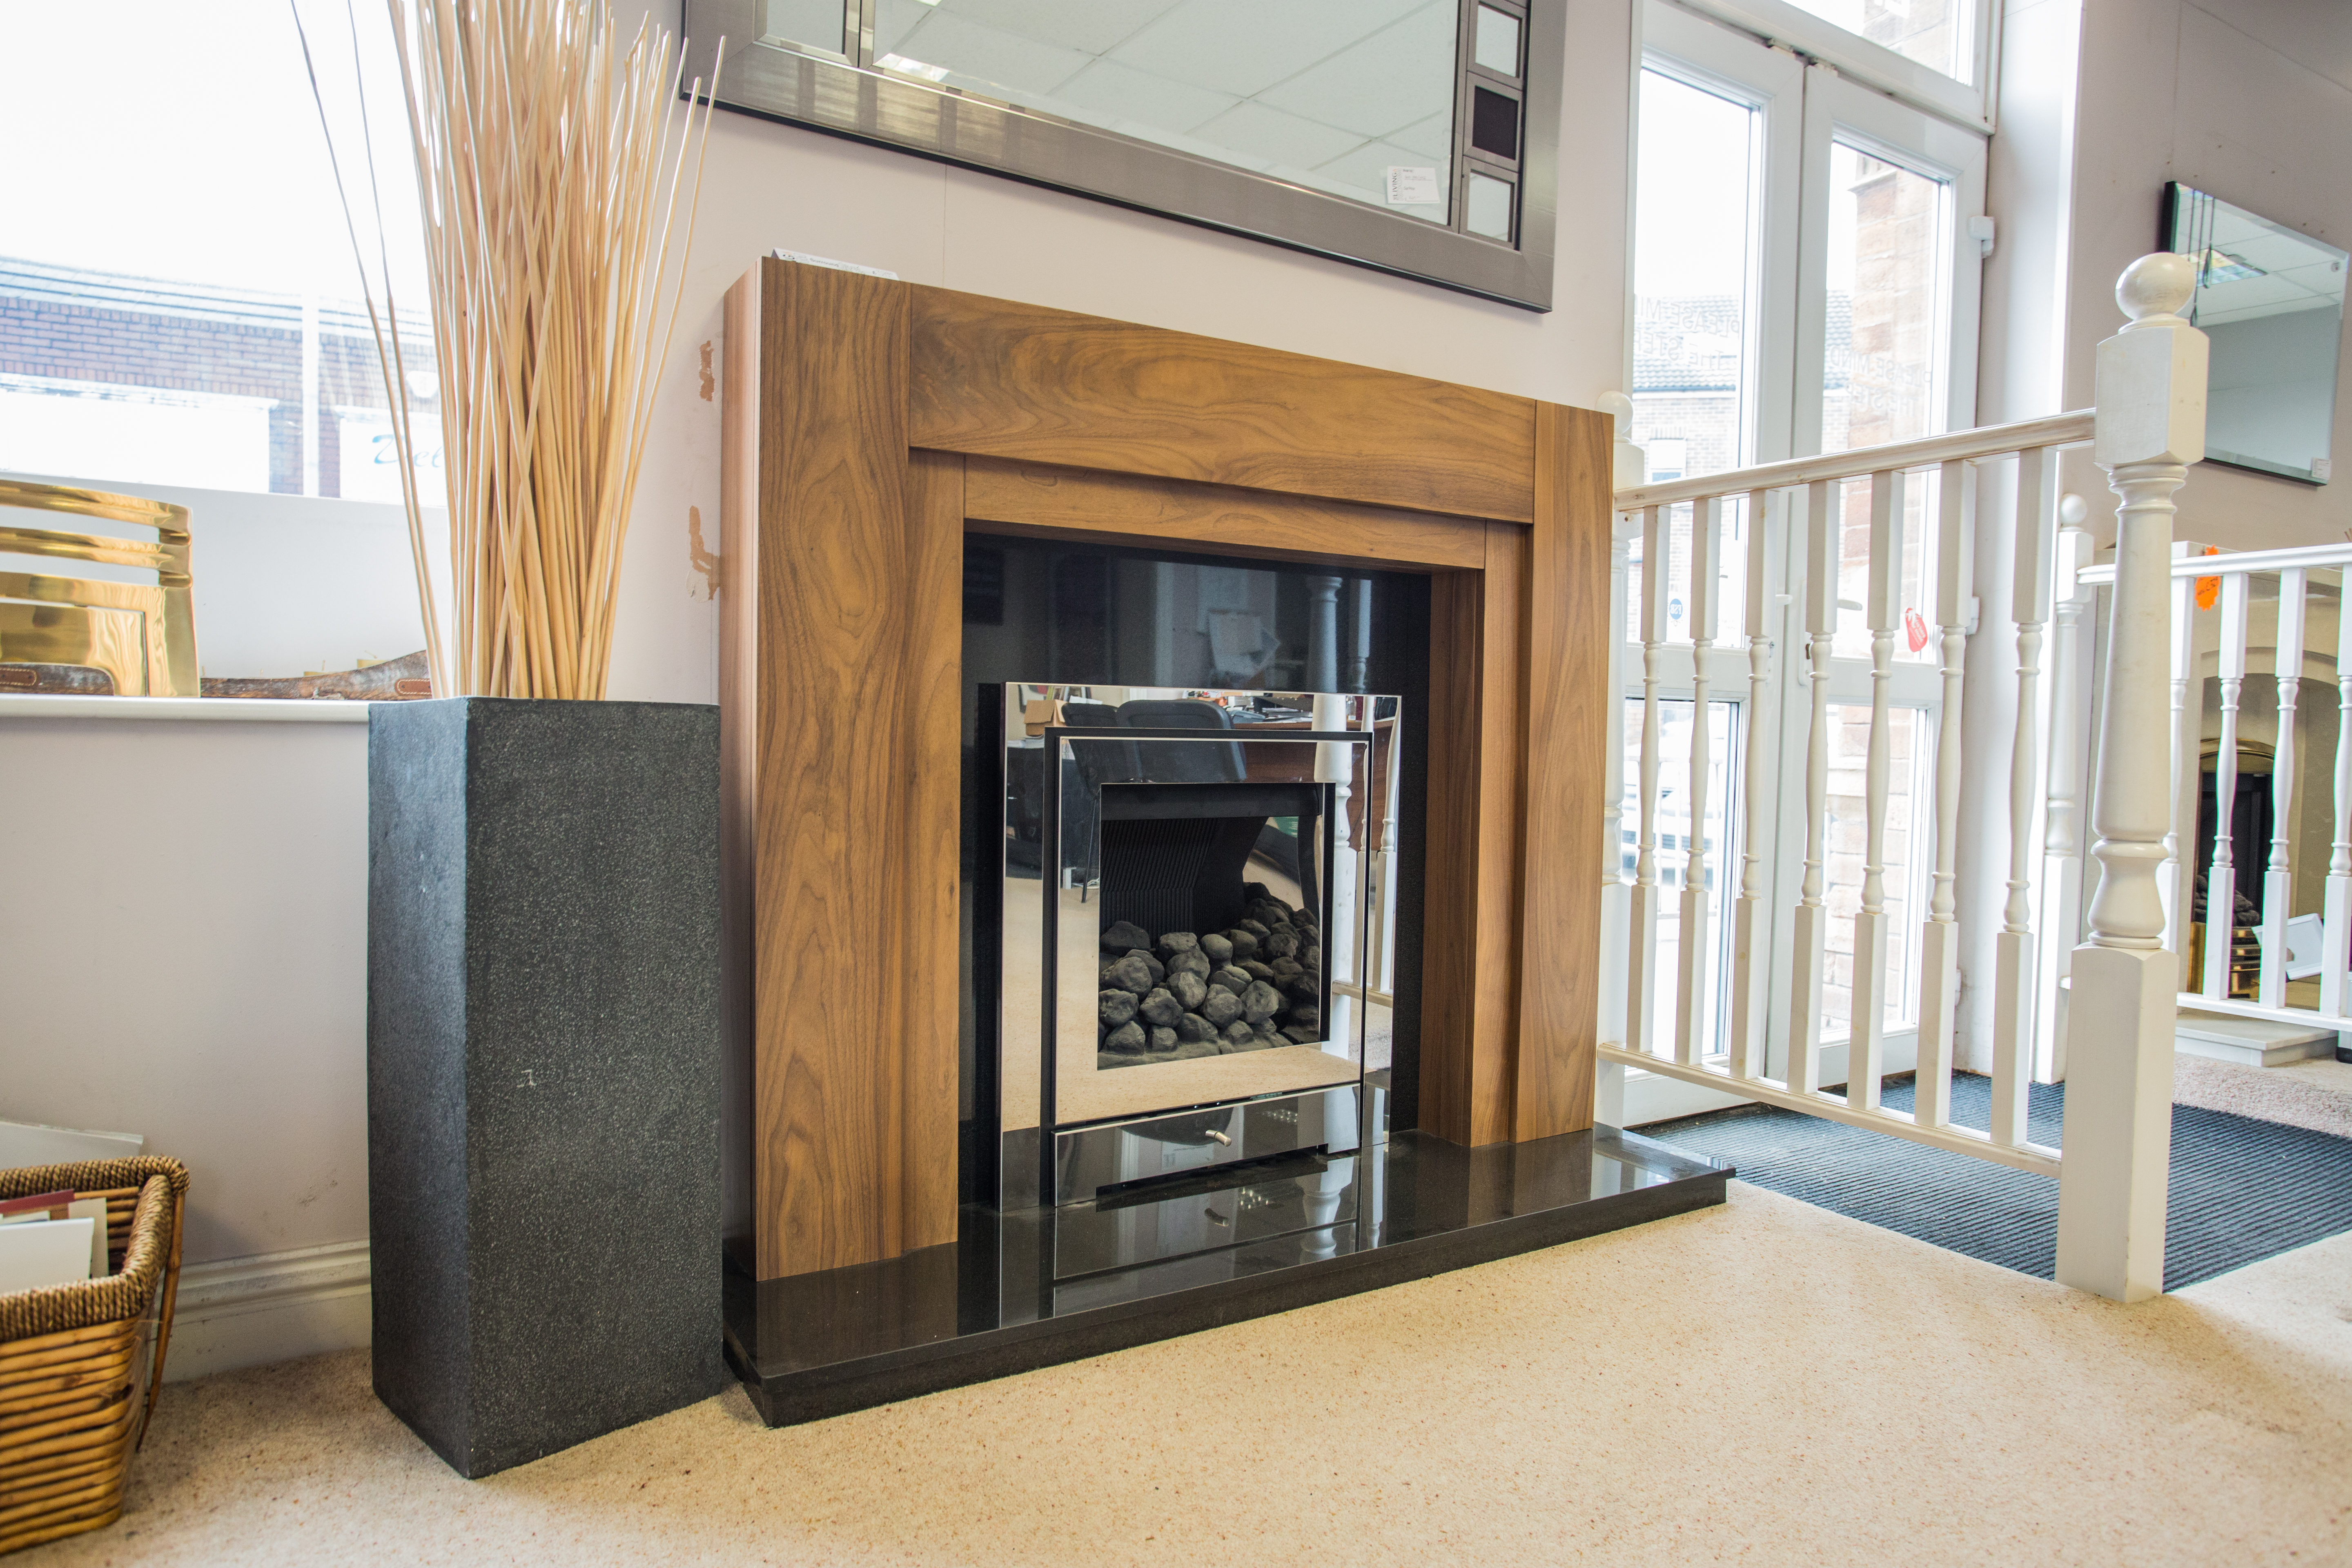 Electric Fires Fireplaces Wakefield, The Living Room Tlr Fireplaces 131 Doncaster Road Wakefield Wf1 5dy